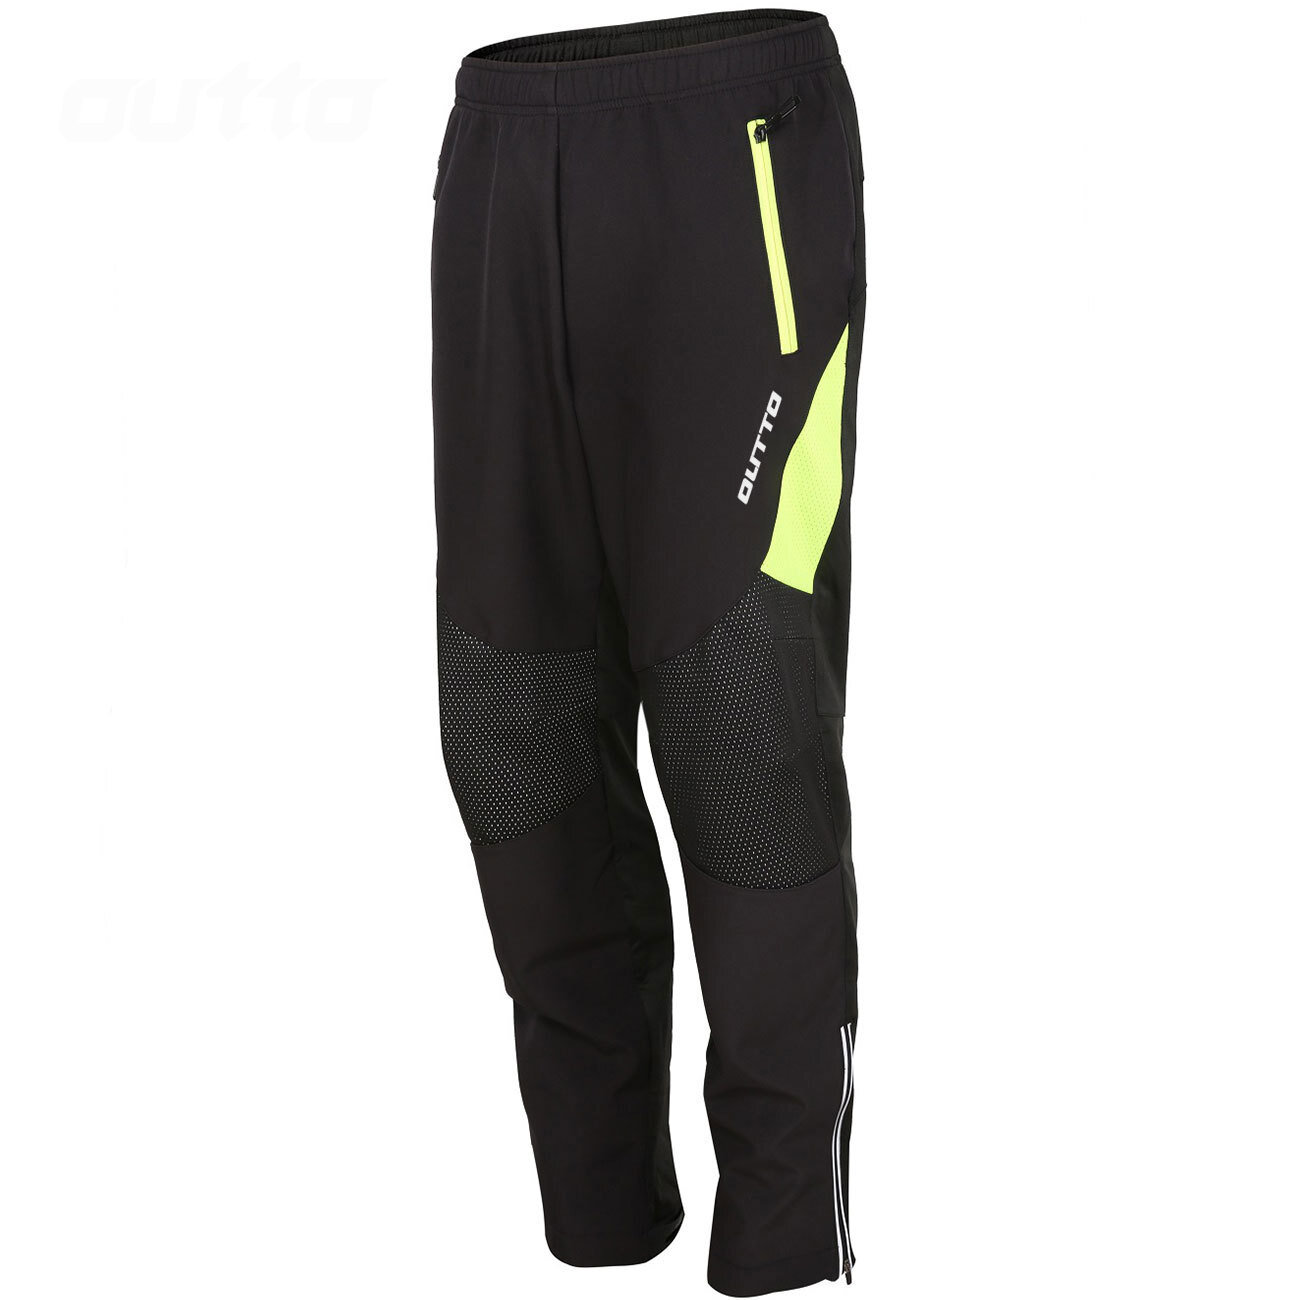 OUTTO Winter Men Cycling Trousers Fluorescent Green Waterproof Thermal MTB Bike Bicycle Riding Running Snowboarding Long